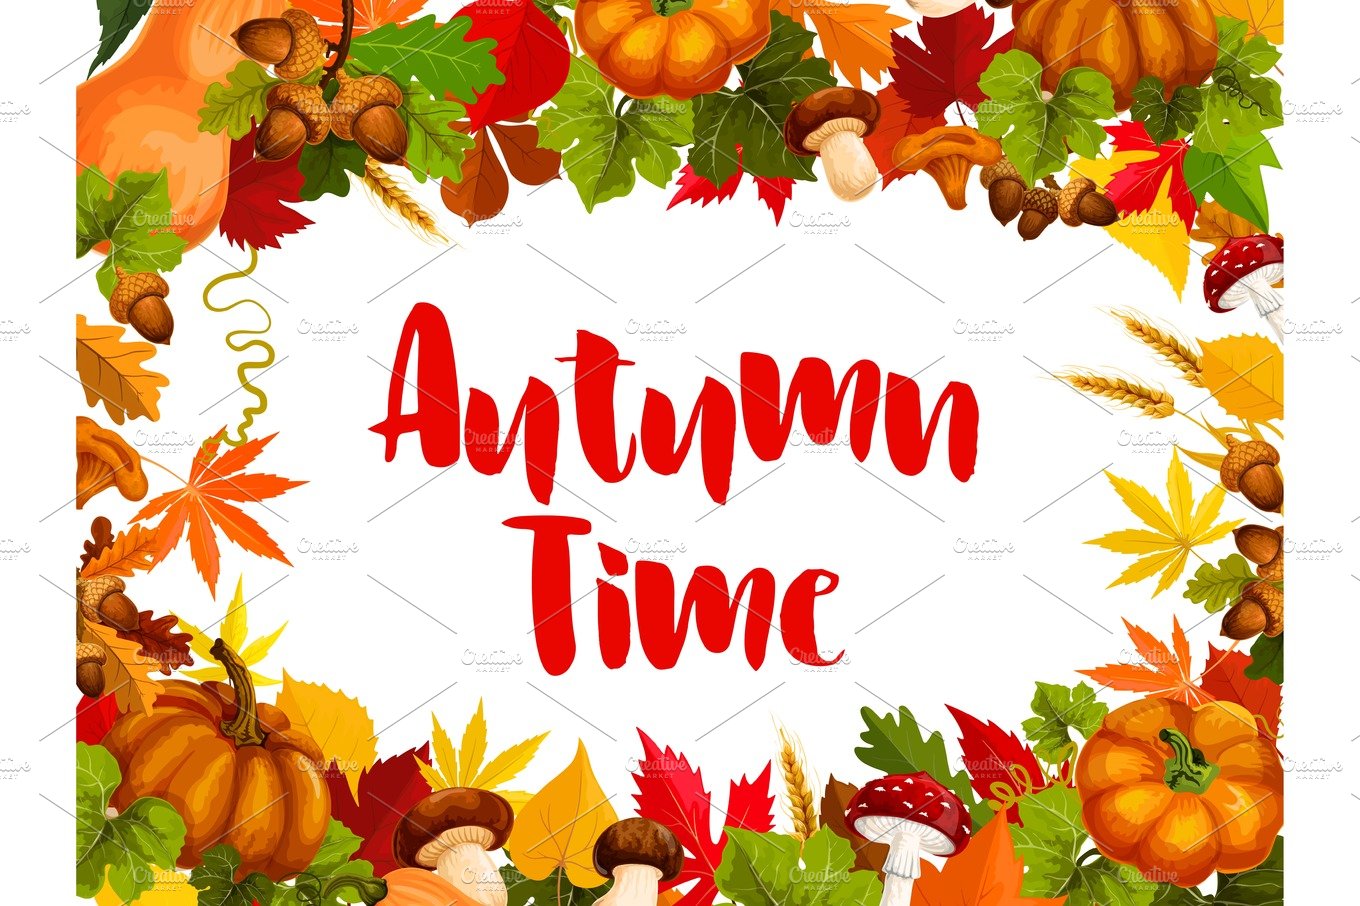 Autumn time poster for fall nature season template cover image.